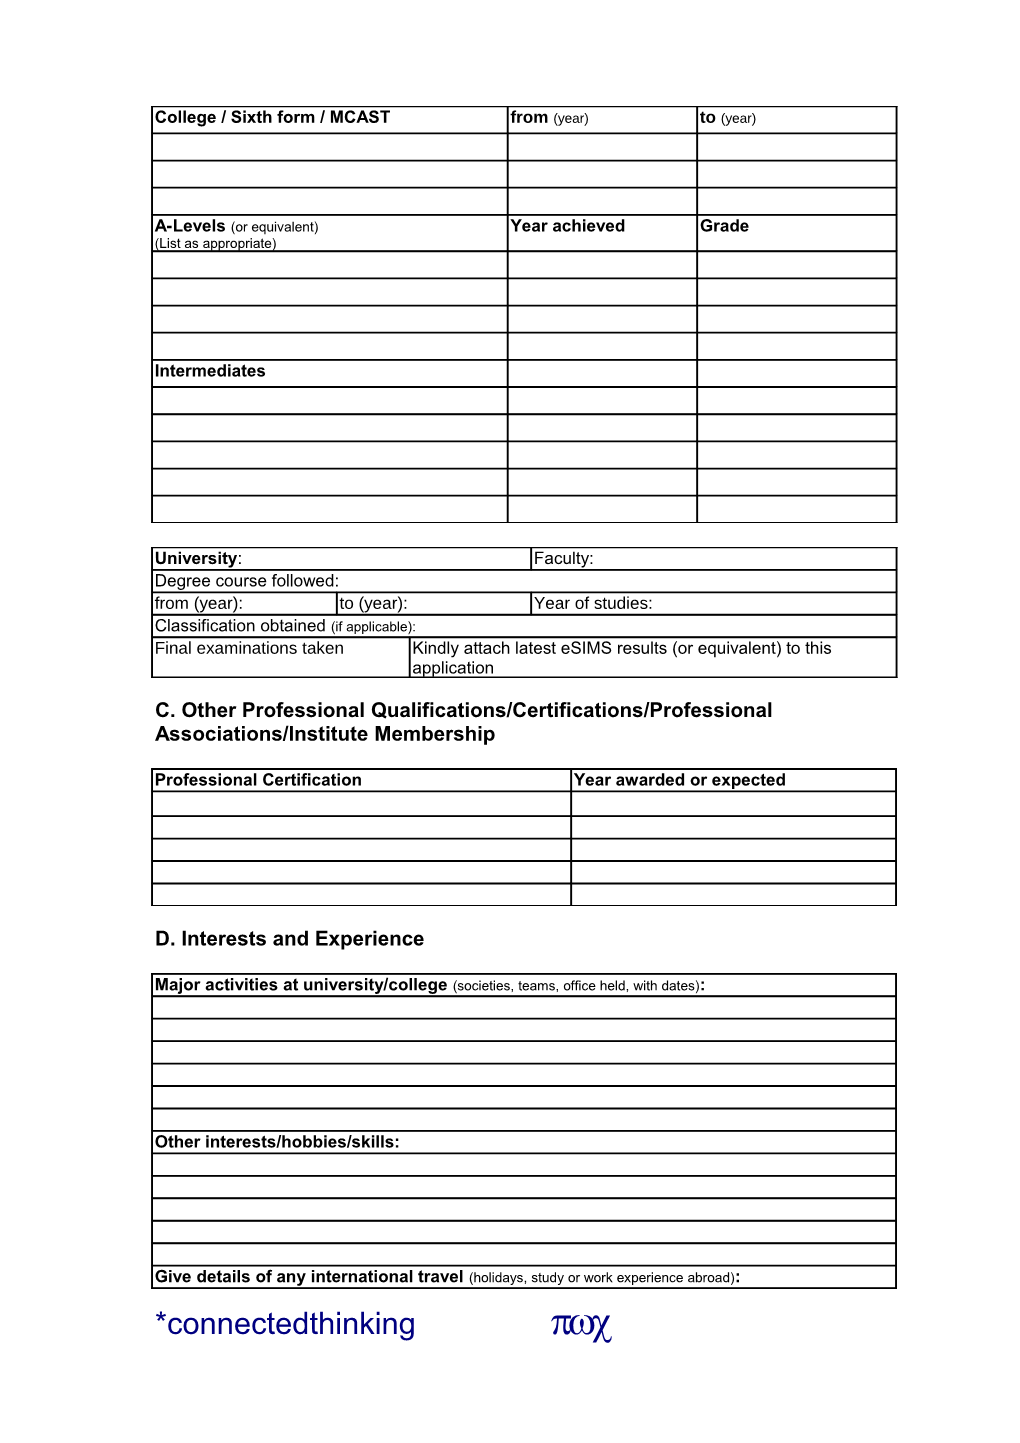 Please Complete This Form As Fully As Possible and E-Mail It To